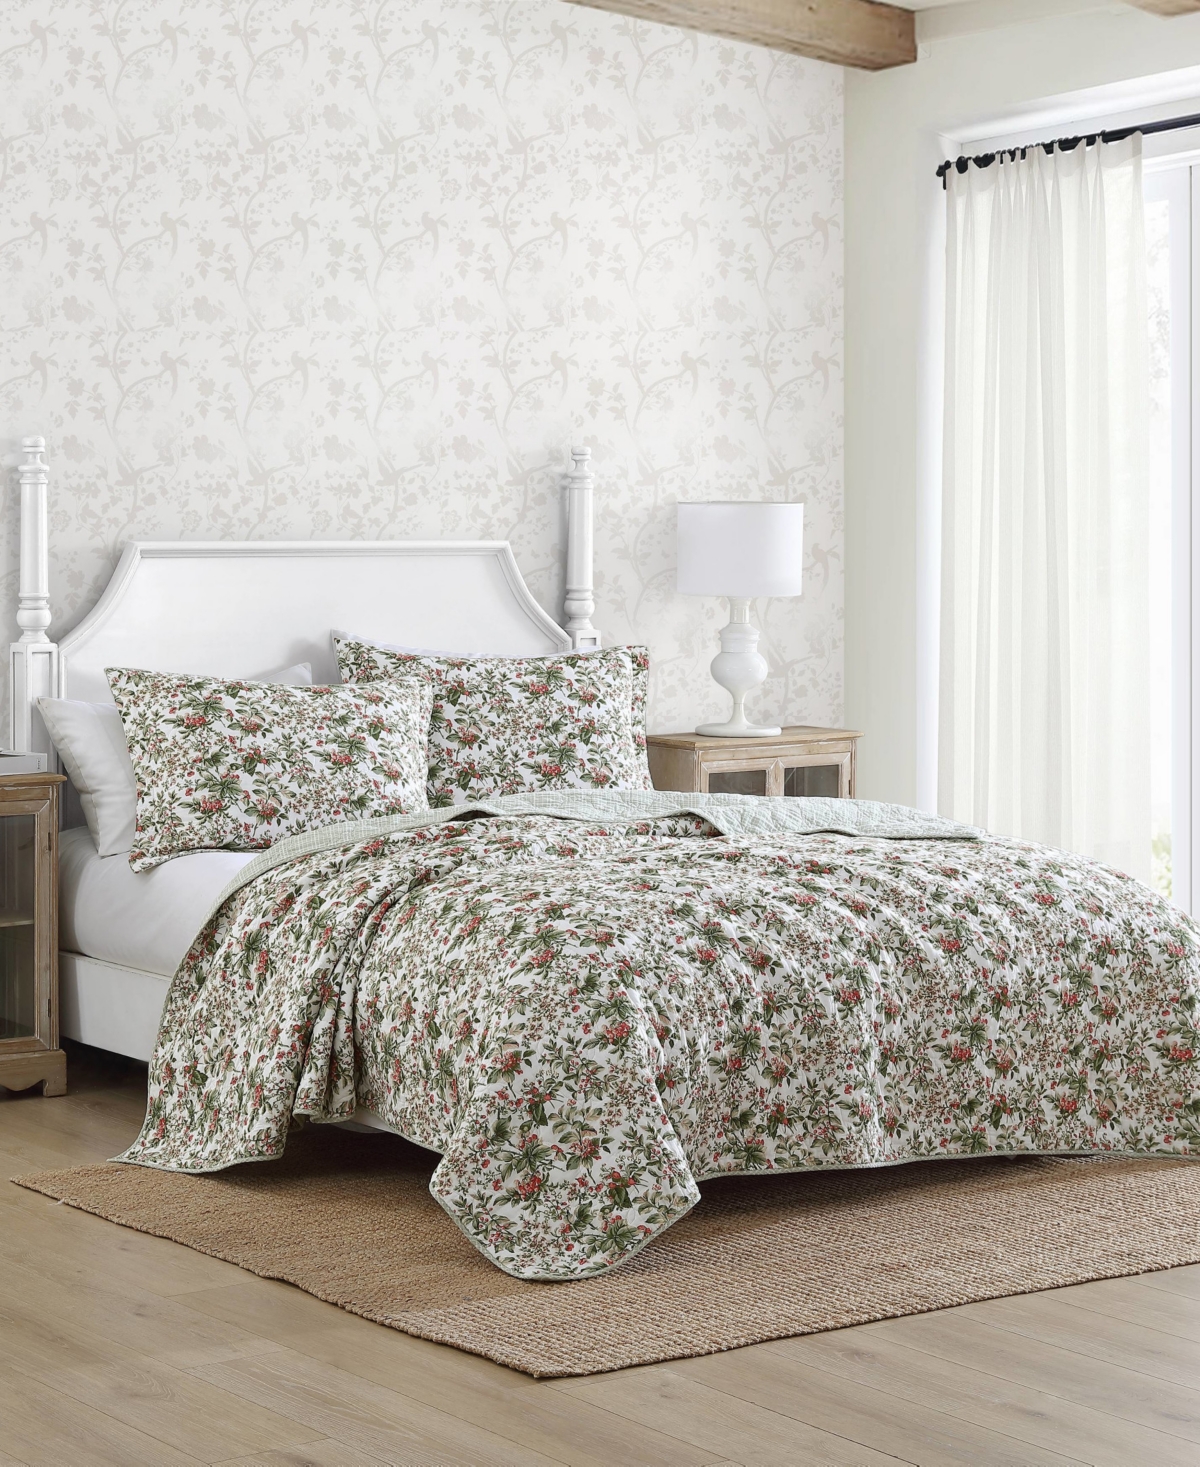 Laura Ashley Bramble Floral Cotton Reversible 3-piece Quilt Set, Full/queen In Green,rose